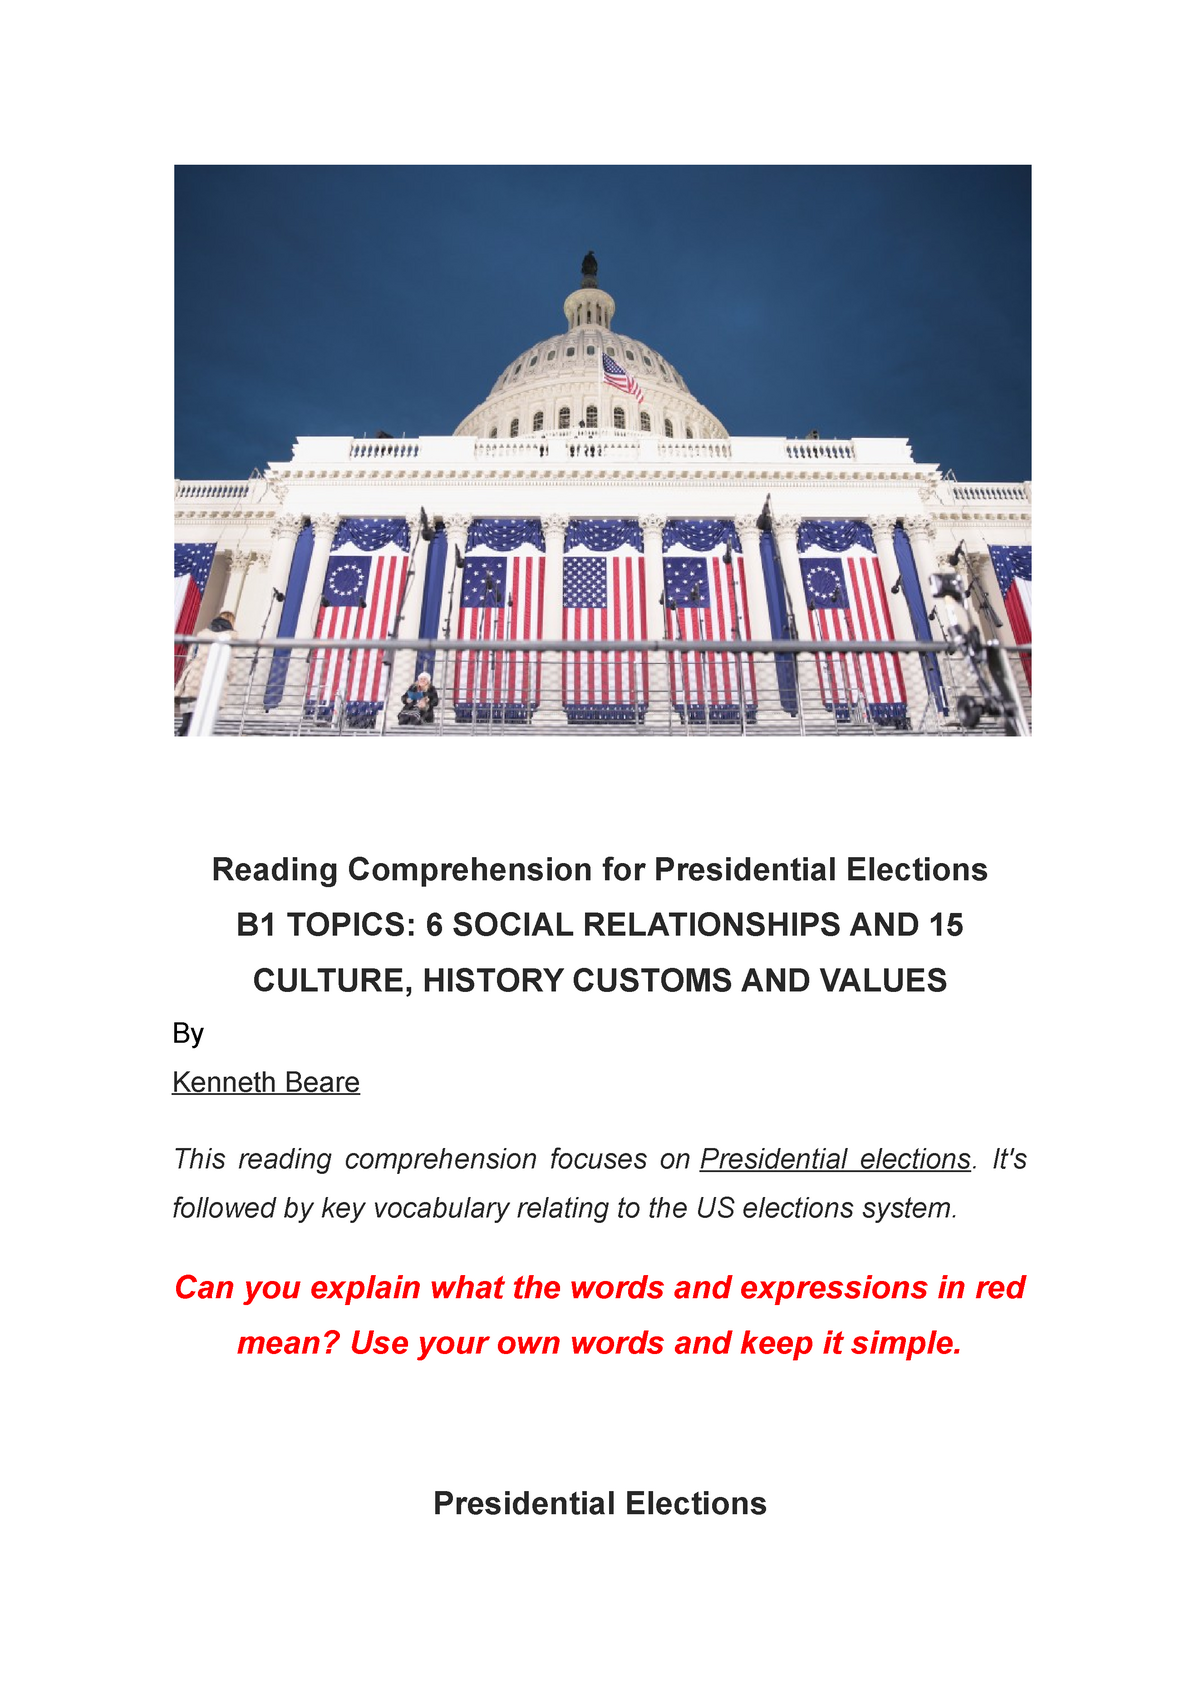 Reading Comprehension For Presidential Elections Its Followed By Key Vocabulary Relating To